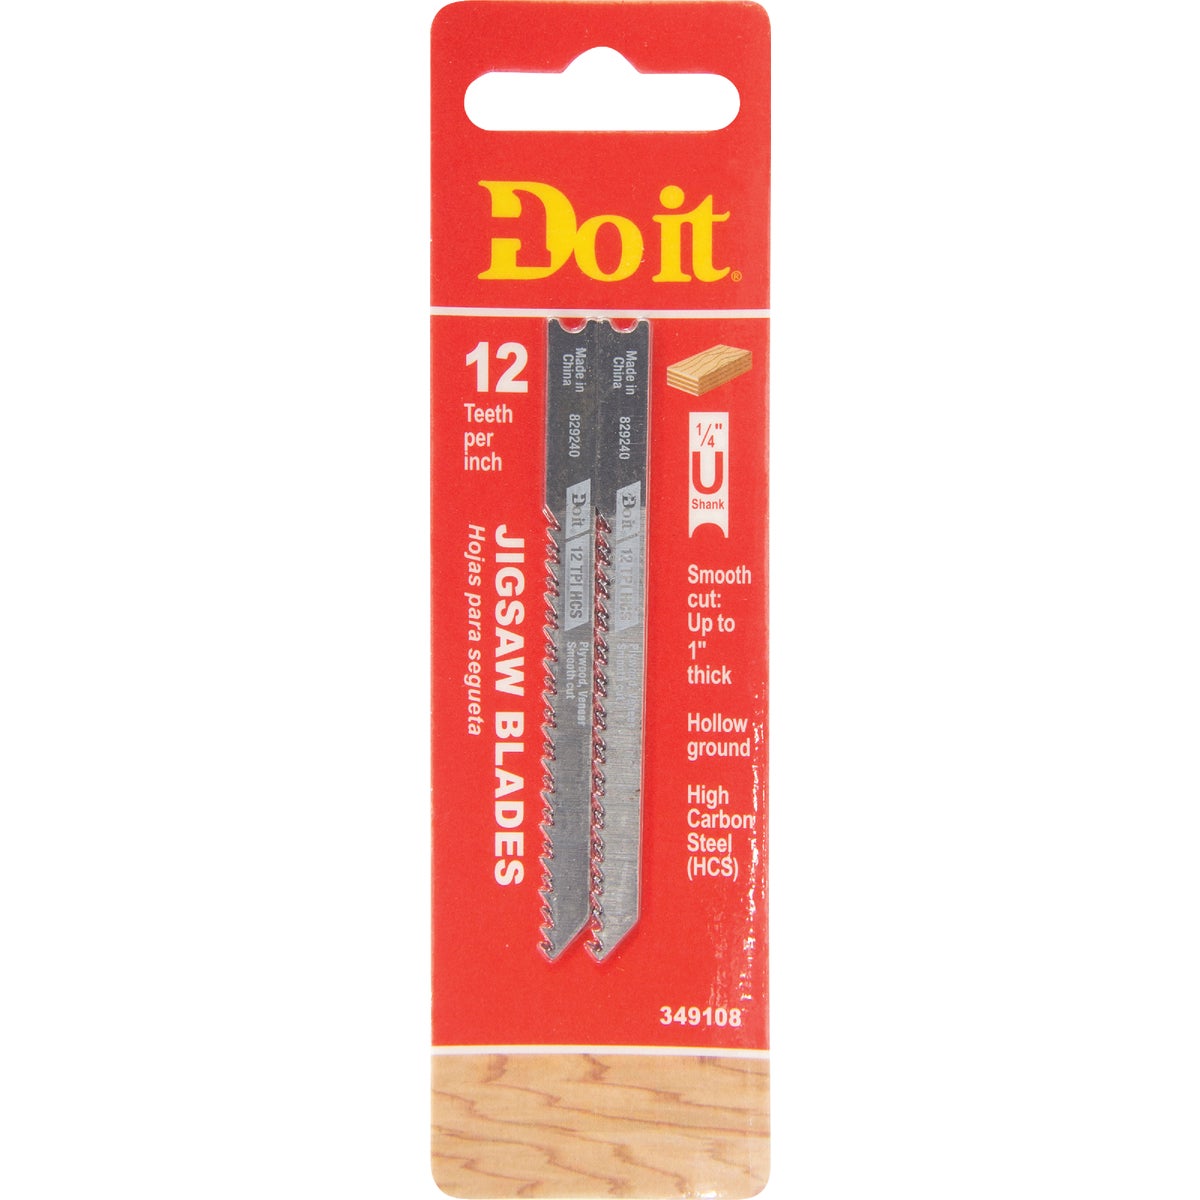 Do it Best U-Shank 3 In. x 12 TPI High Carbon Steel Jig Saw Blade, Wood up to 1 In. (2-Pack)